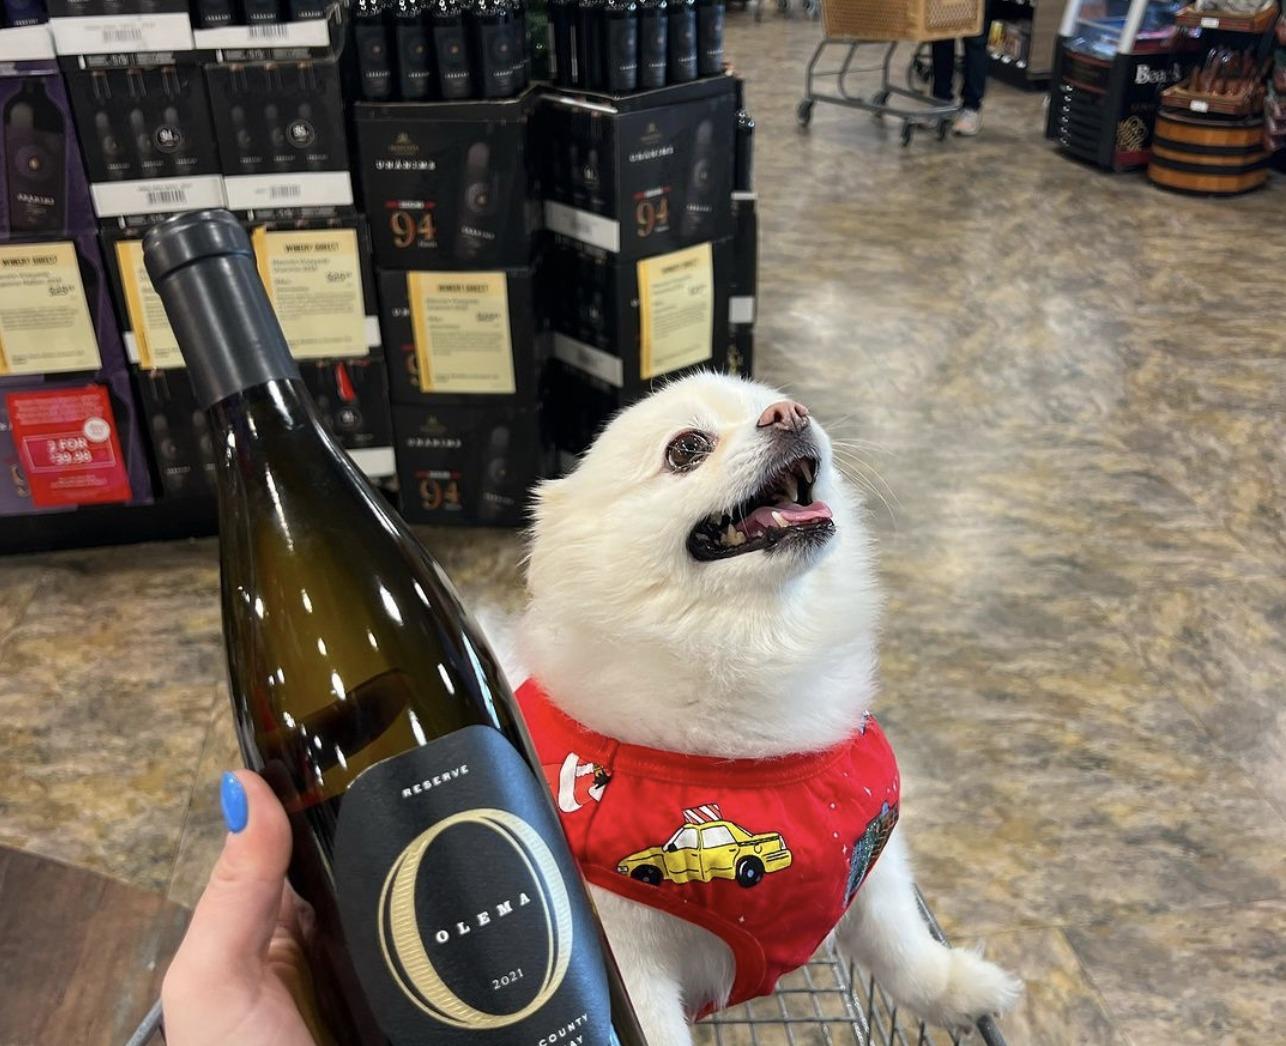 Pet Friendly Total Wine & More Orlando Colonial Plaza